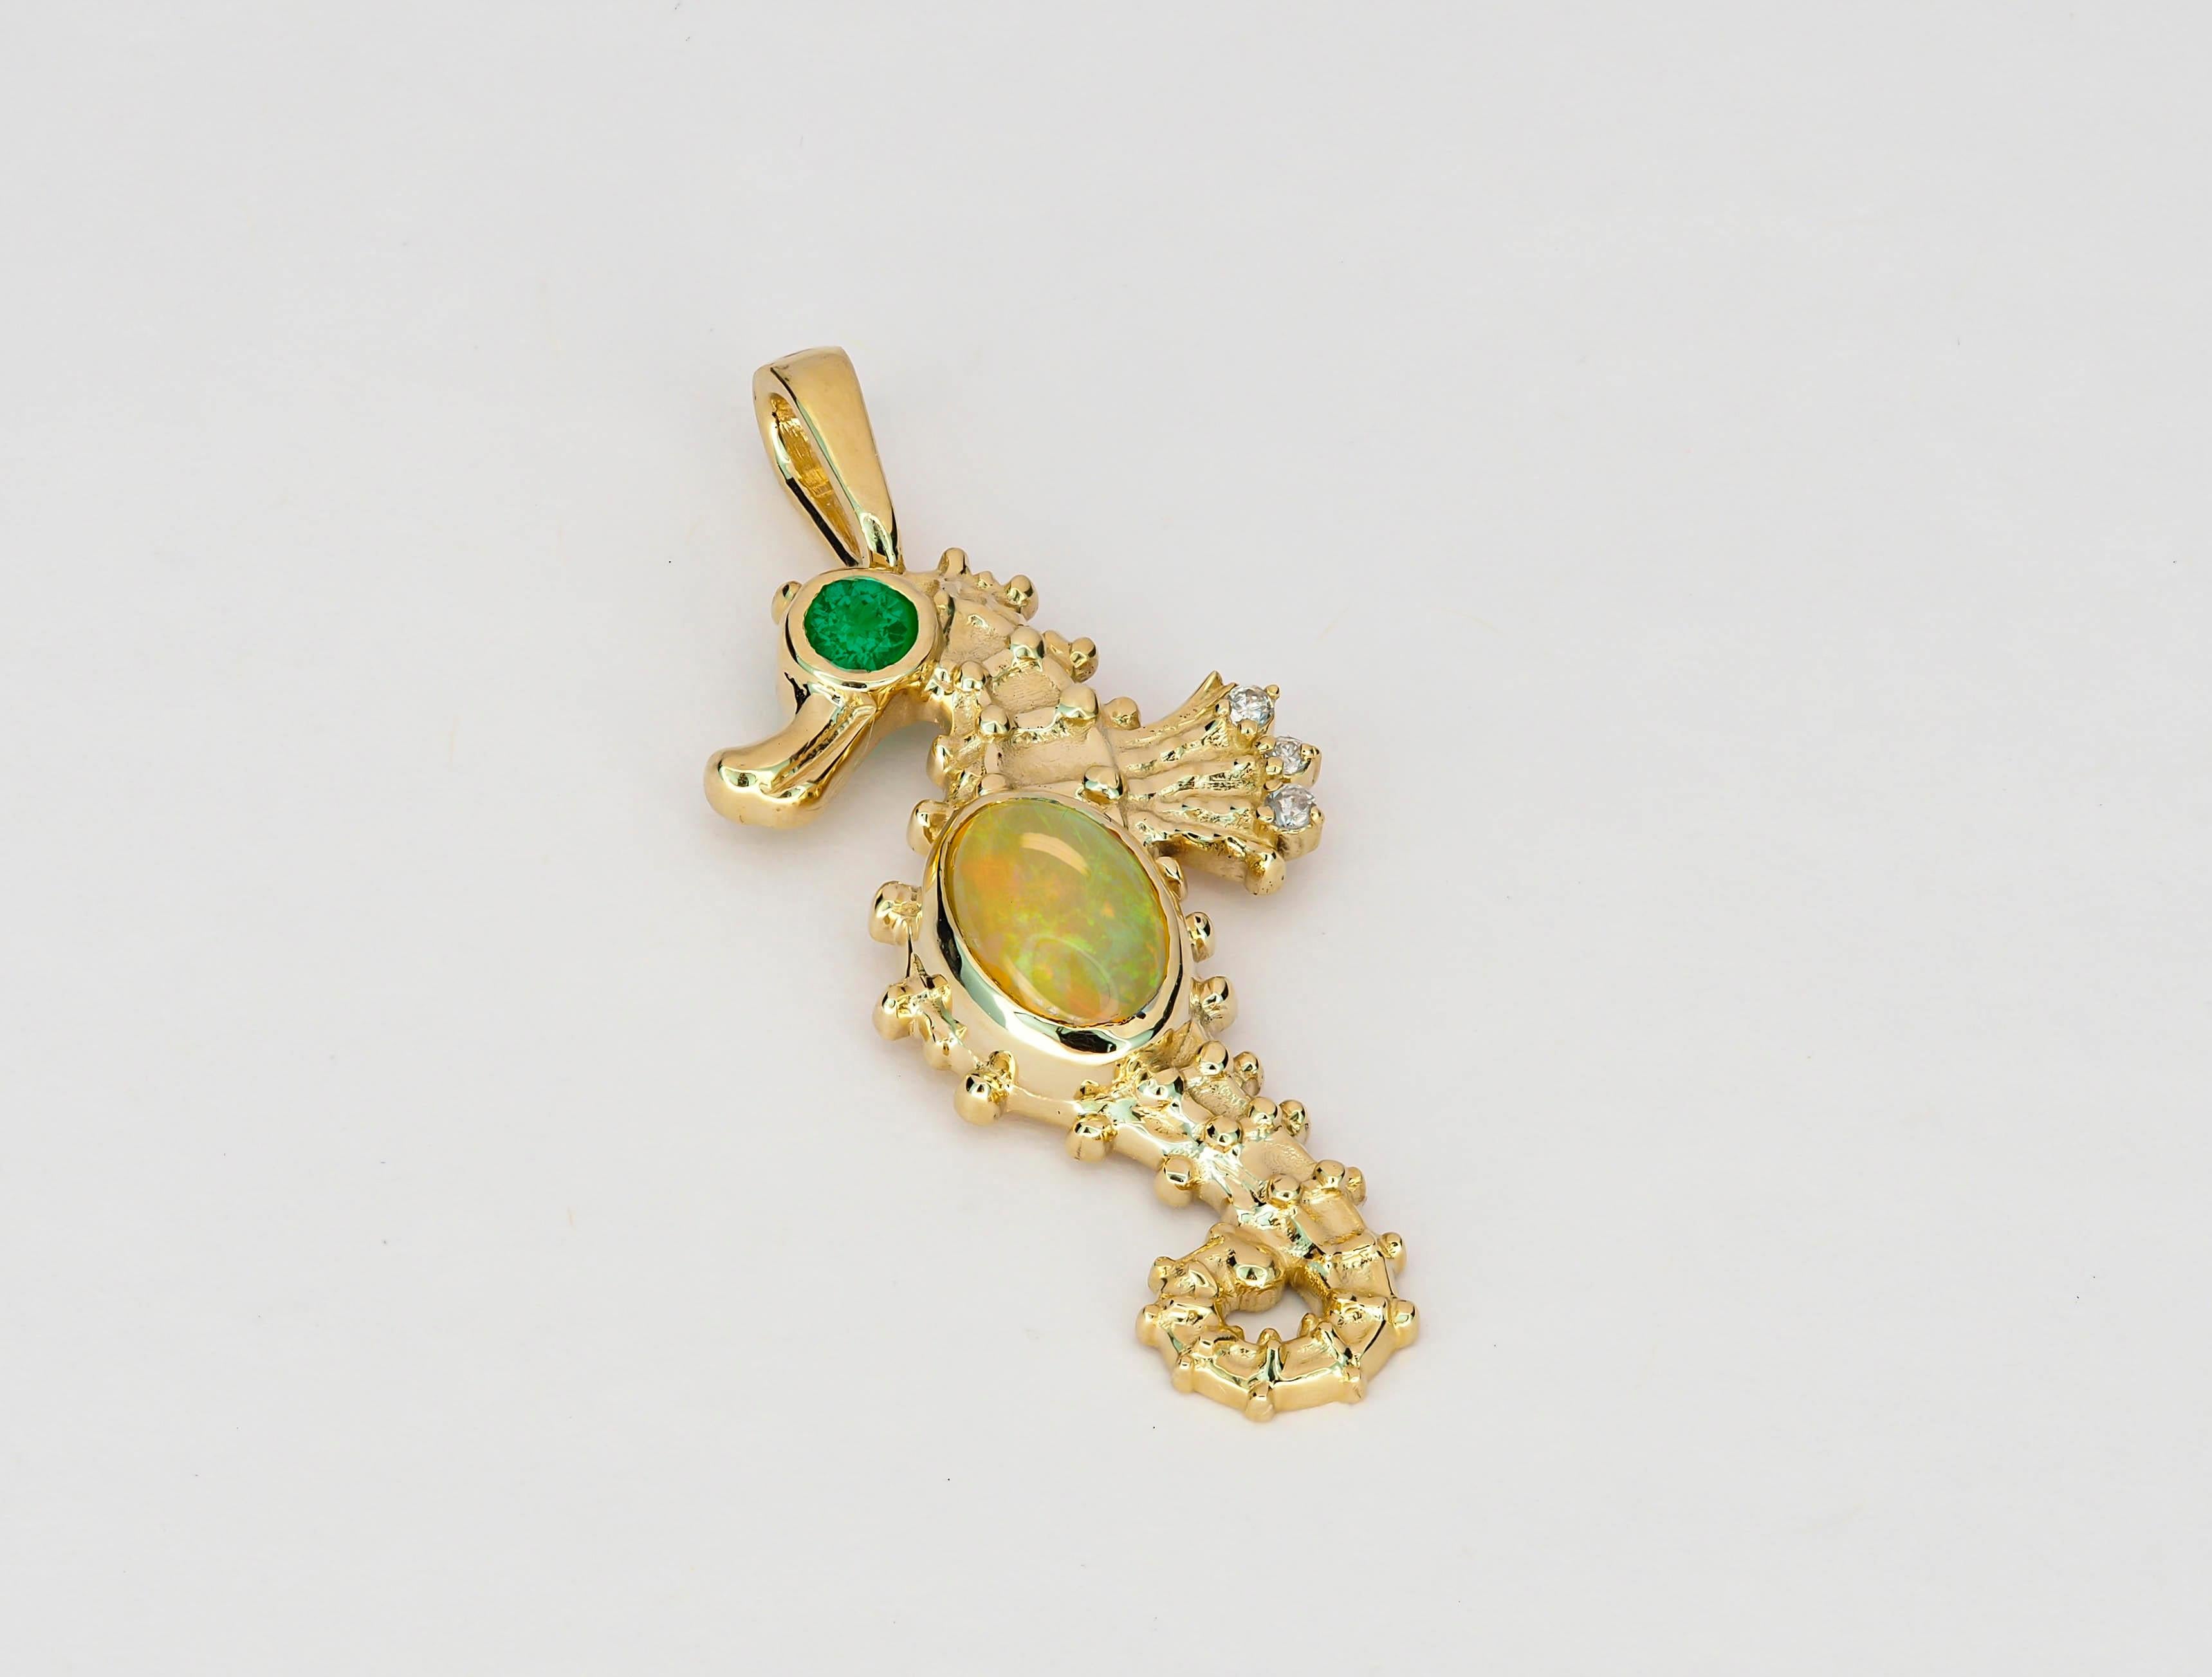 14 kt solid gold starhorse pendant with natural opal, emerald and diamonds. October birthstone.
Size: 31 x 13.5 mm.
Total weight: 2.20 g.

Gemstones:
Opal: oval cabochon shape, orange-yellow with color flash on pen light, transparent, 1.00